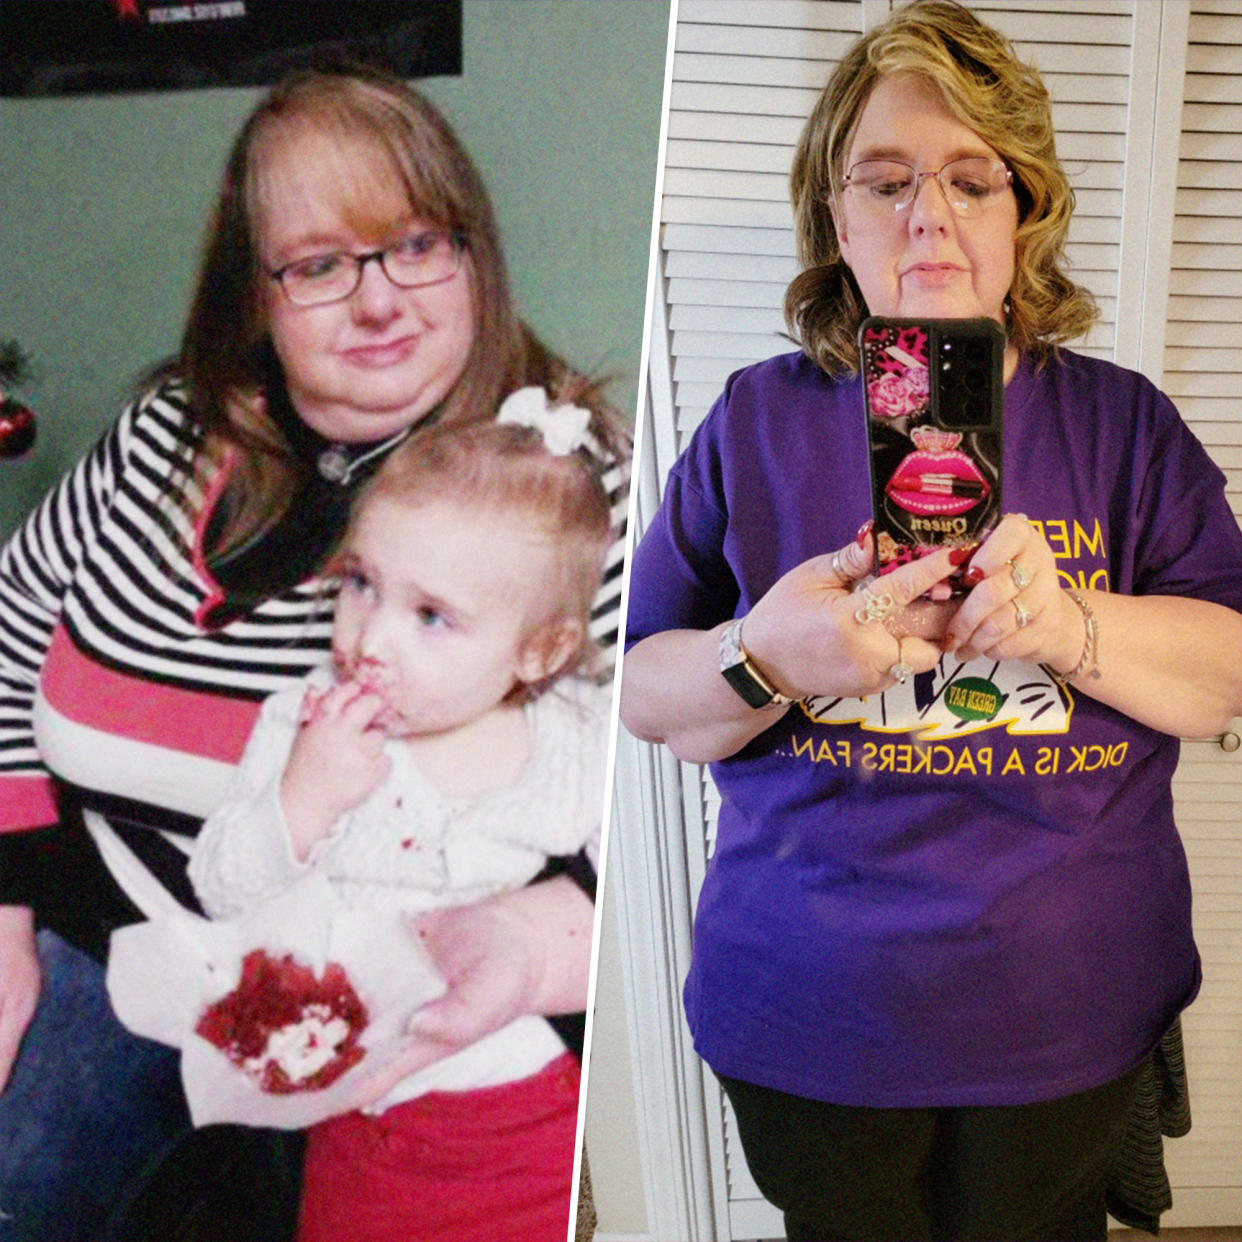 Barbie Jackson-Williams said losing weight has led her to feel more energetic and less inclined to be stationary. (Courtesy Barbie-Jackson Williams)